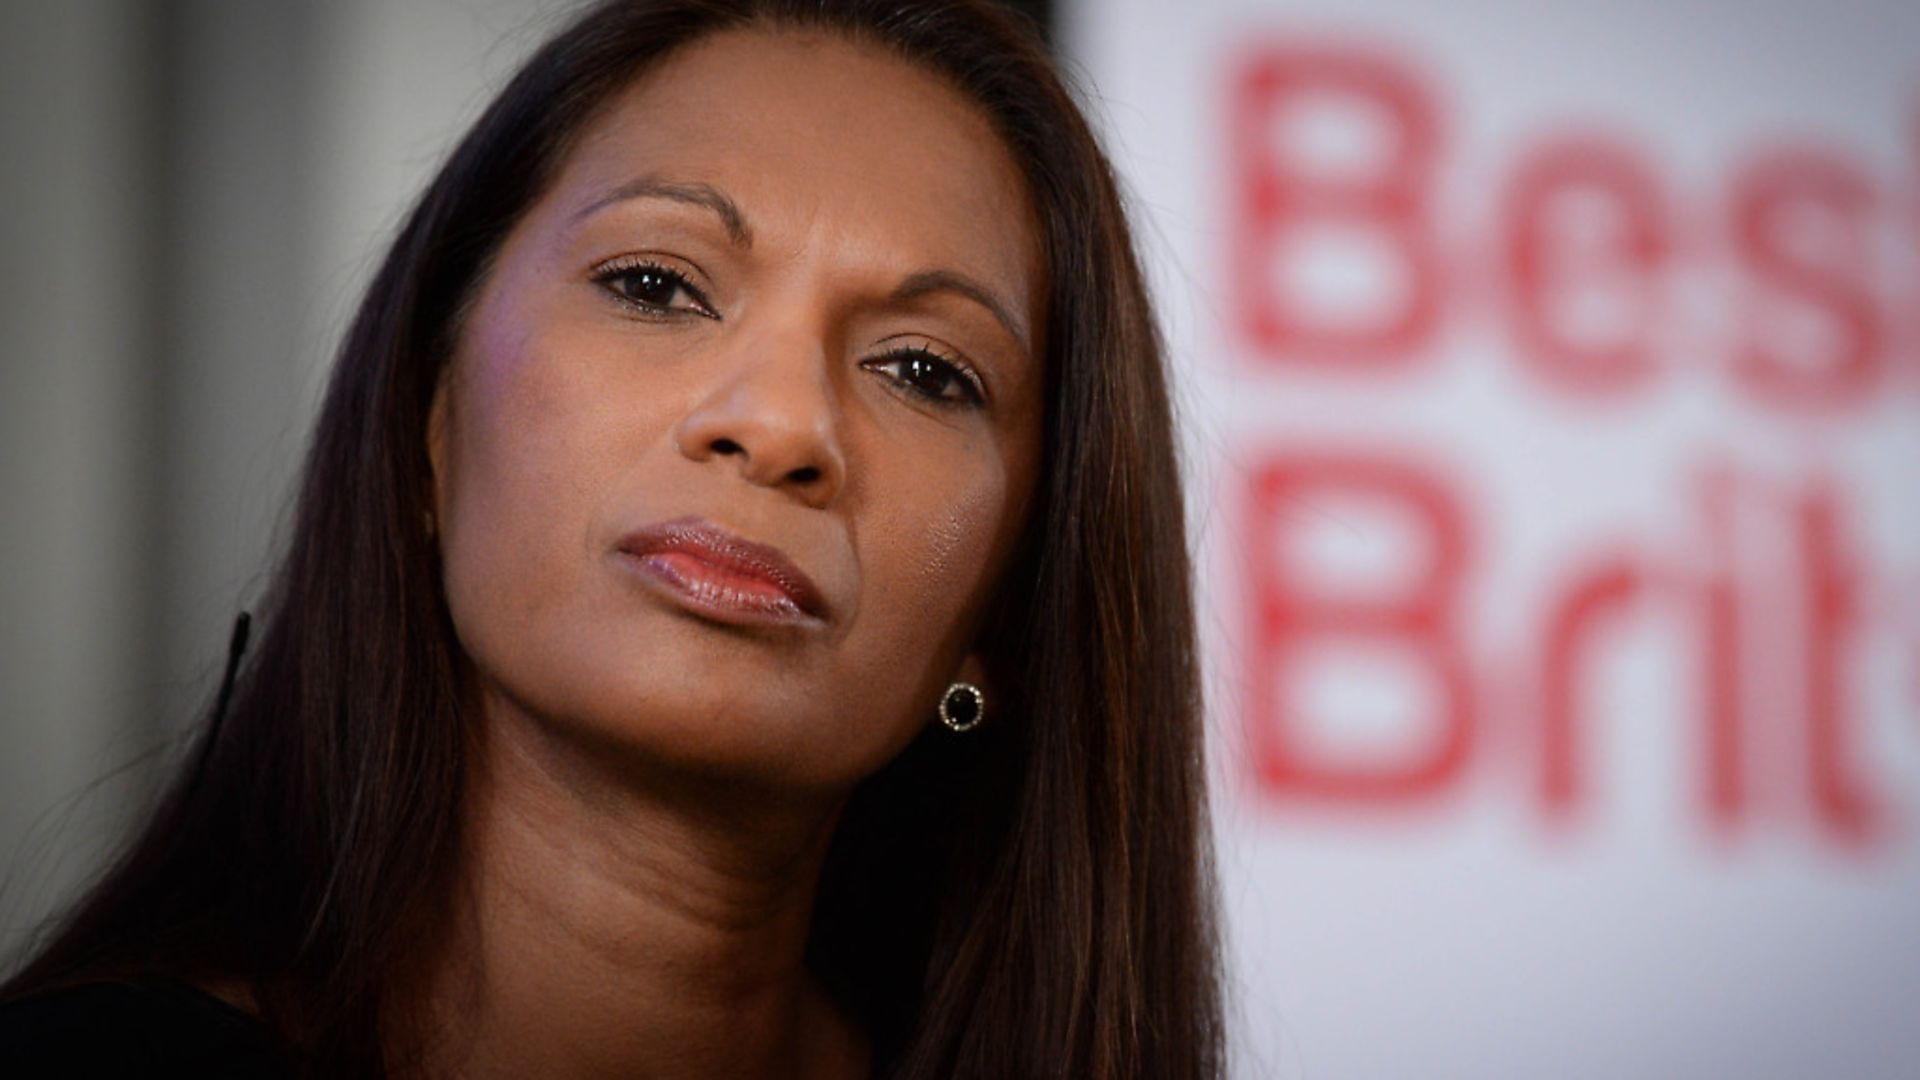 Gina Miller at the launch of the Best for Britain campaign, - Credit: PA Wire/PA Images